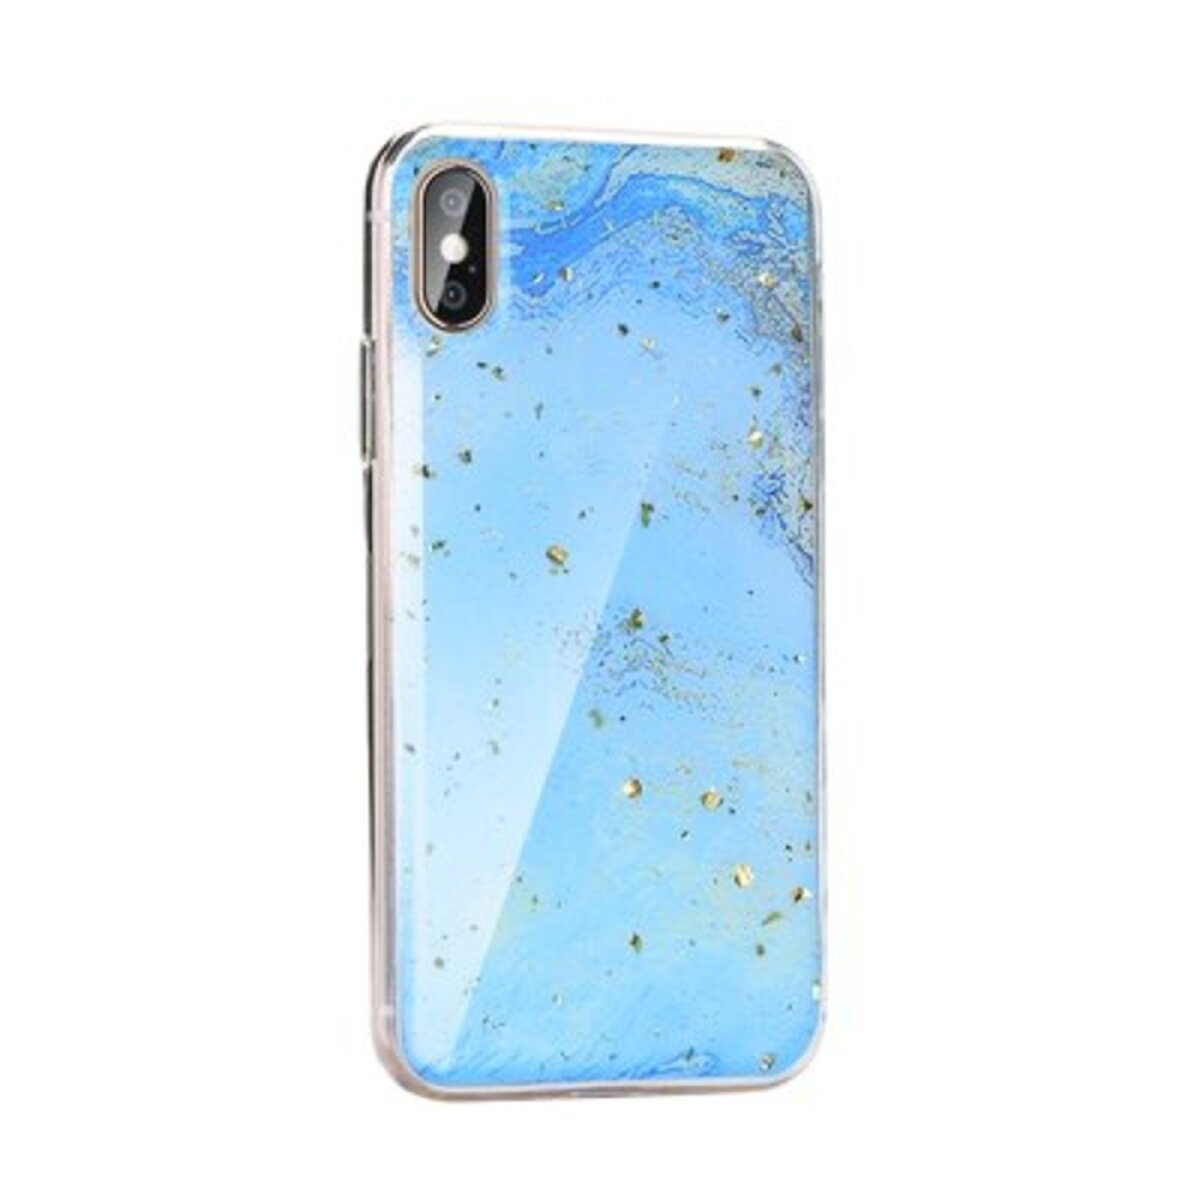 Pro Max, available Pro MARBLE 11 3, Bookcover, Apple, iPhone 11 Max FORCELL Not design iPhone Case